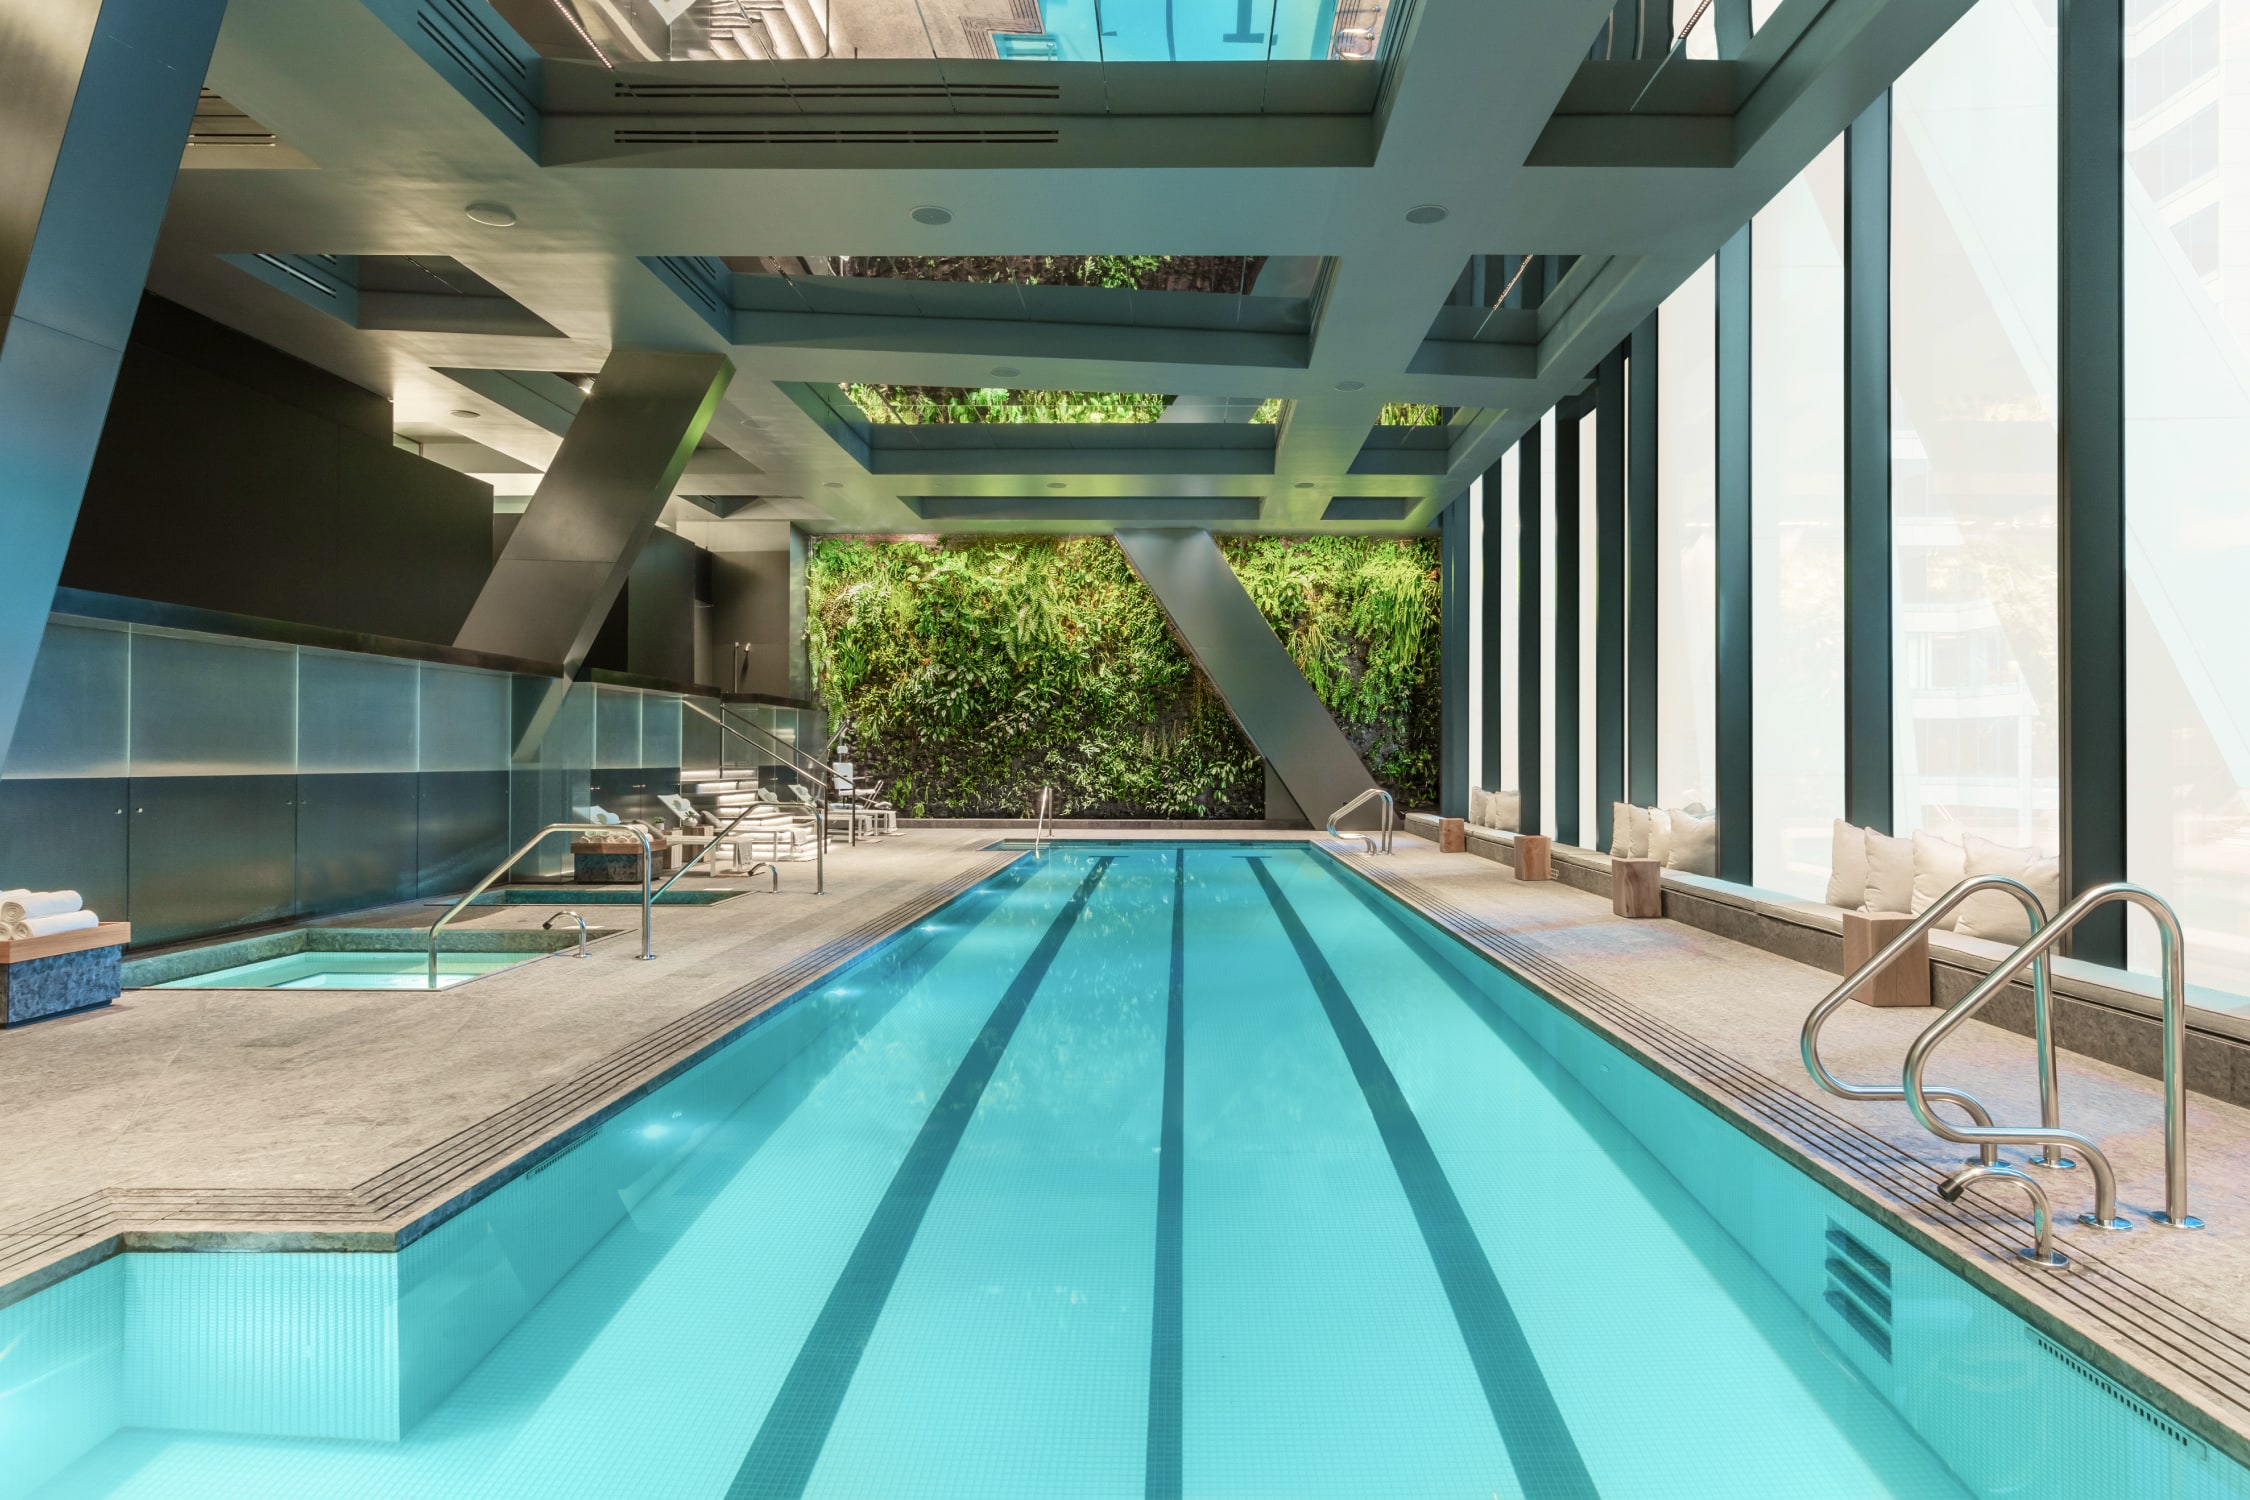 Lap pool and jacuzzis at 53 West 53